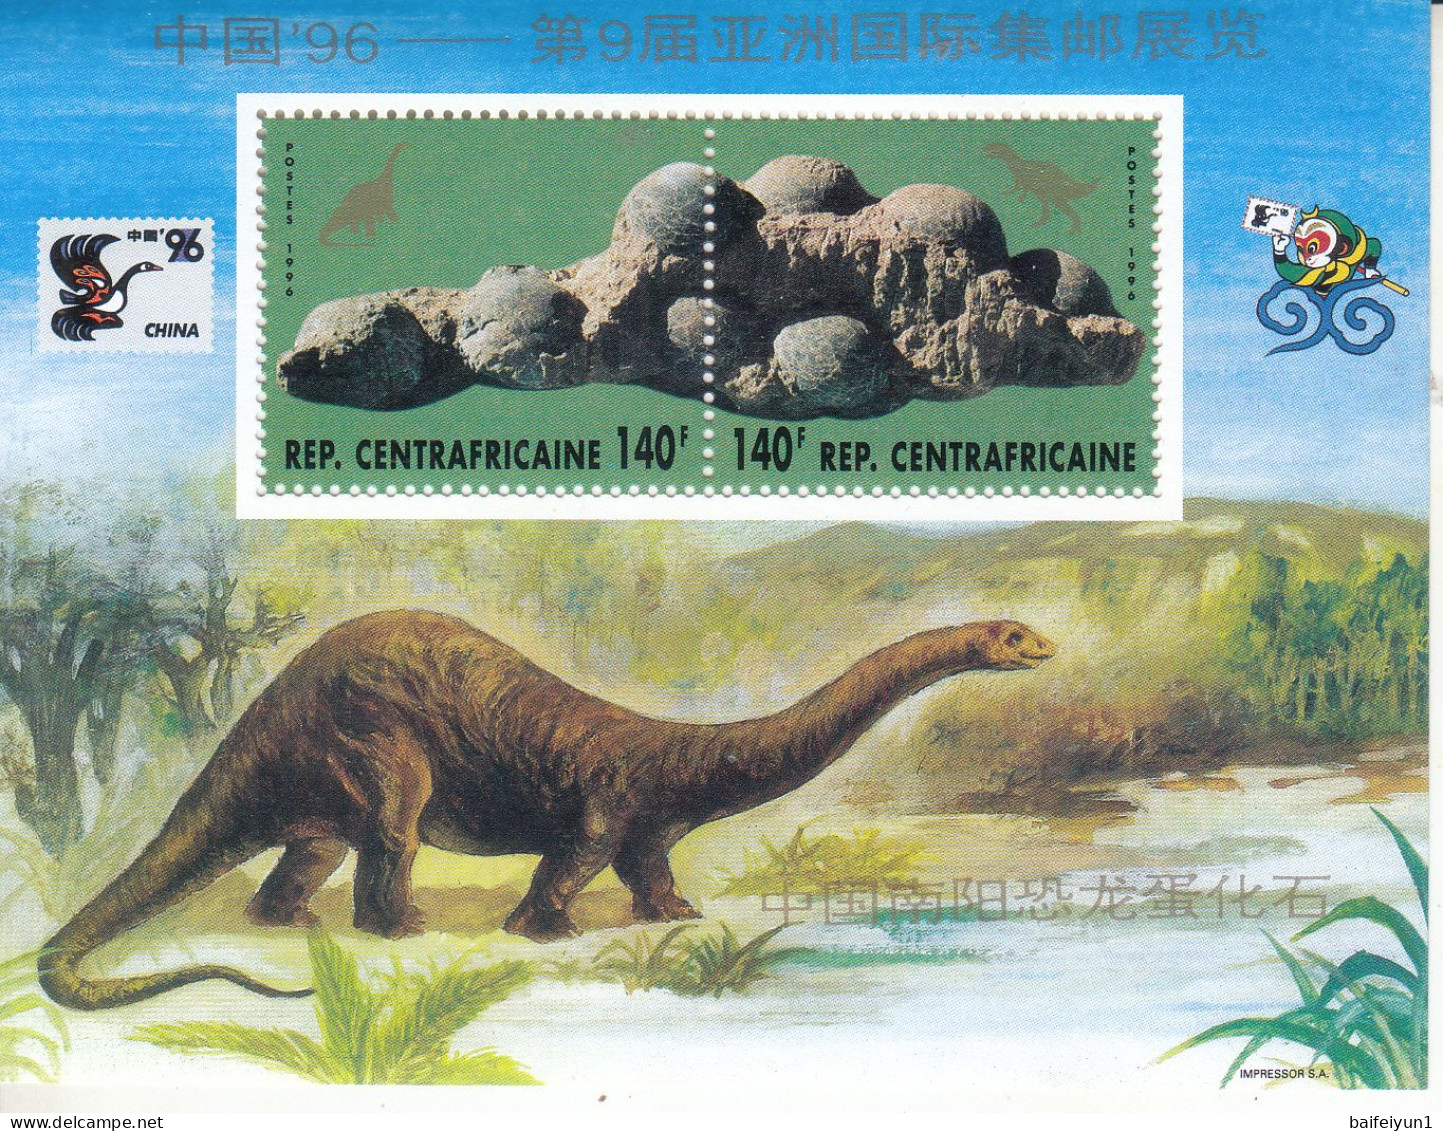 Center Africa 1996 Dinosaur Fossil In Nan Yang Stamps S/S - Fossils